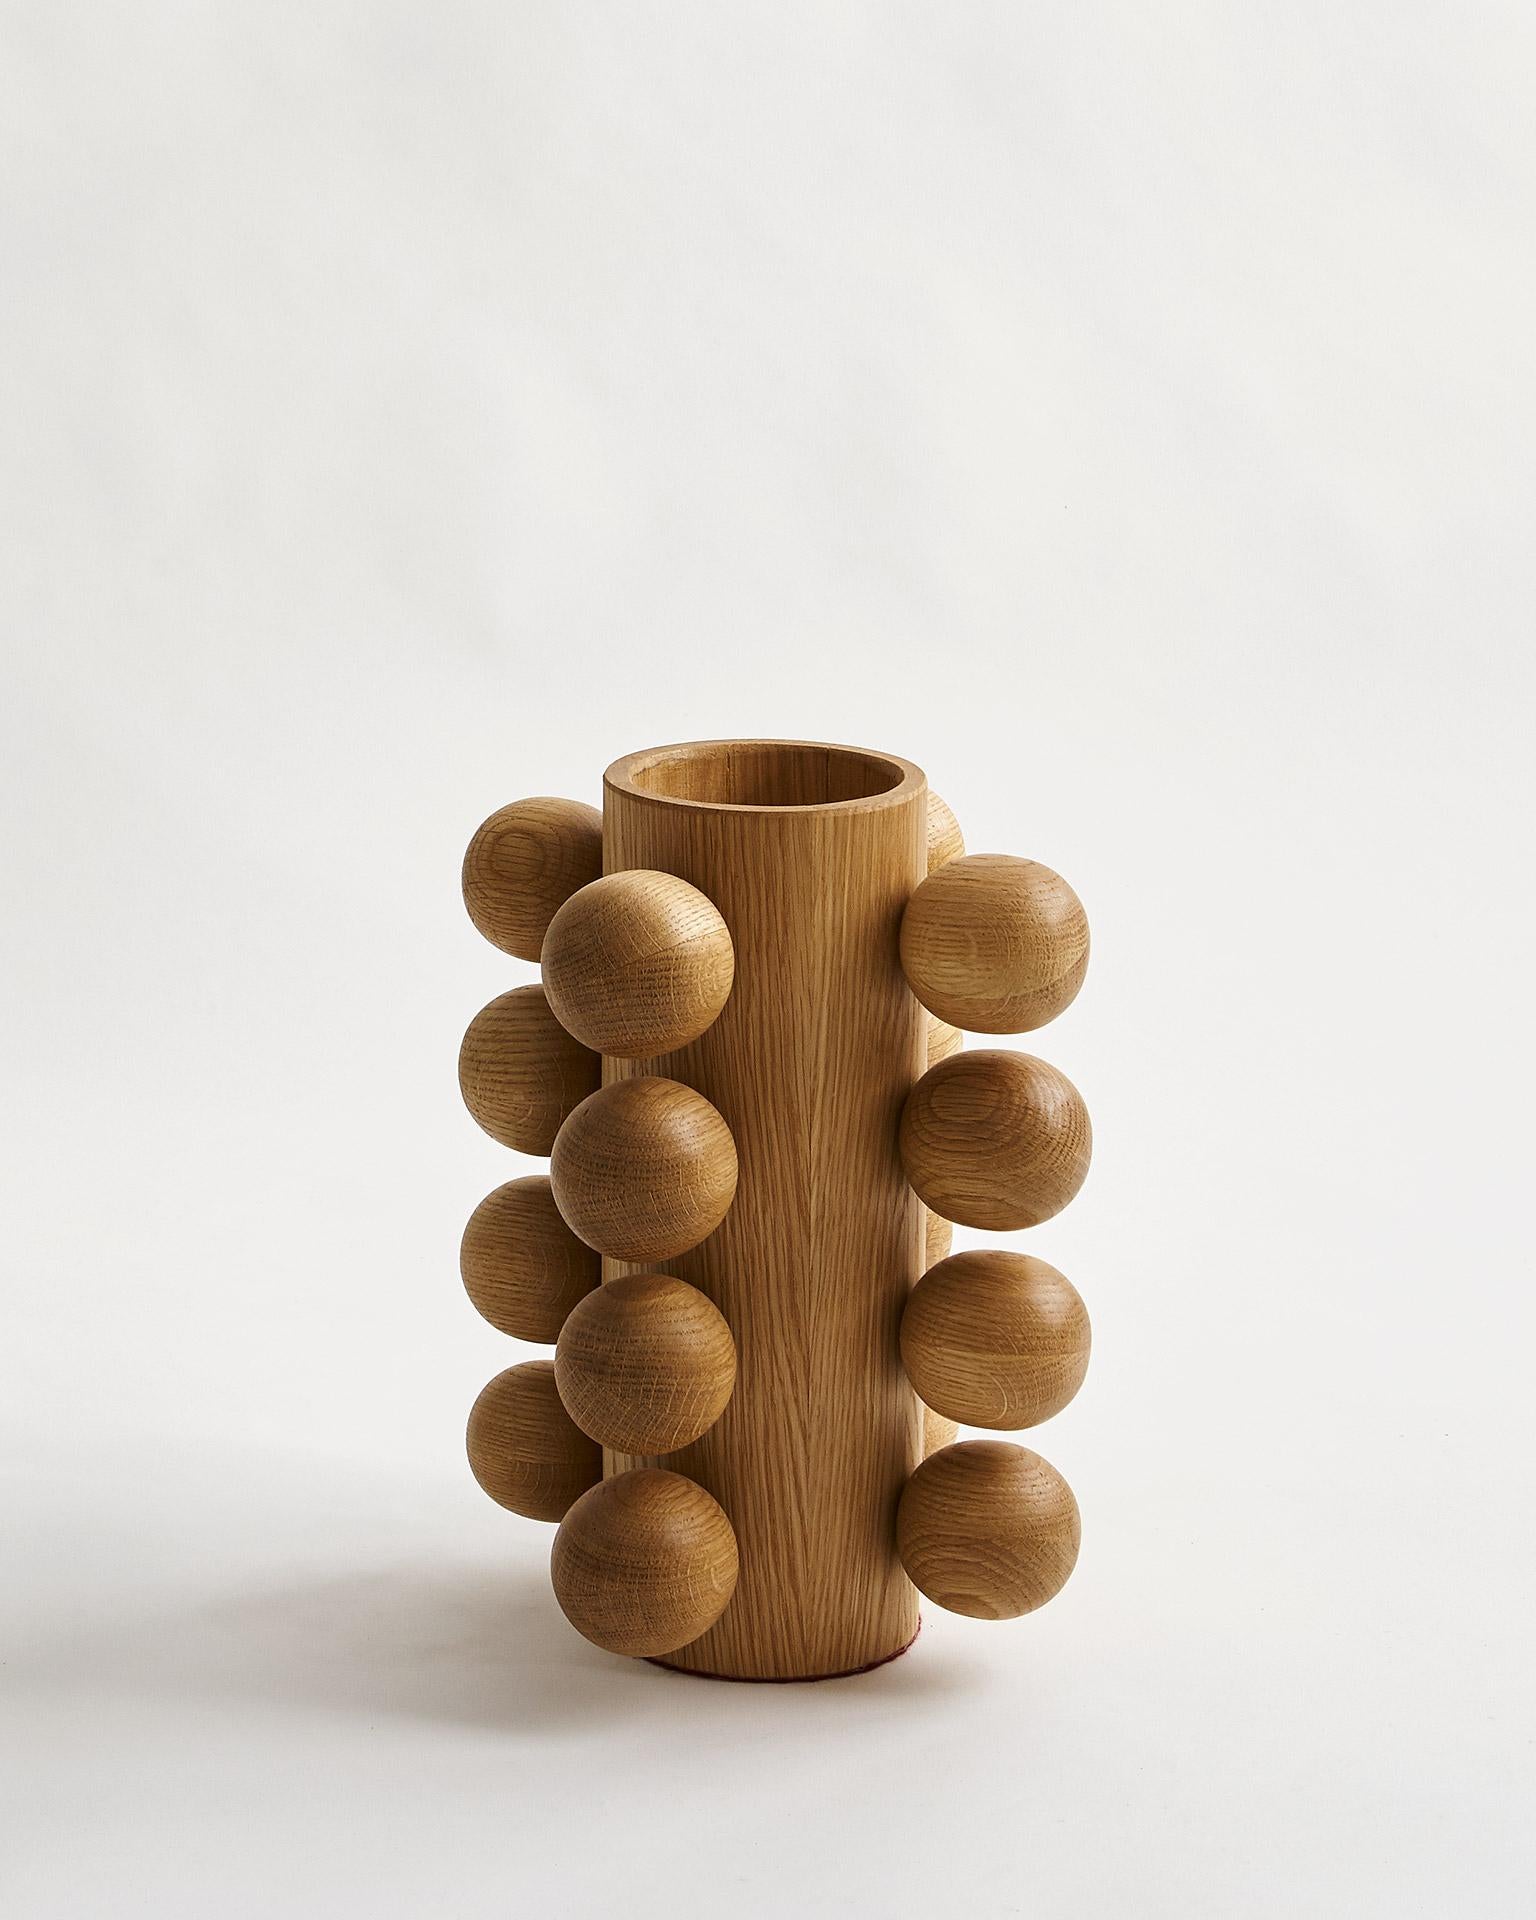 Handcrafted modern wood vase constructed of rift cut white oak with a matte natural poly finish in white. This made-to-order, eye-catching vase is part of the Studio Line collection, known as the Bubble Vase. Available in white, black, or natural